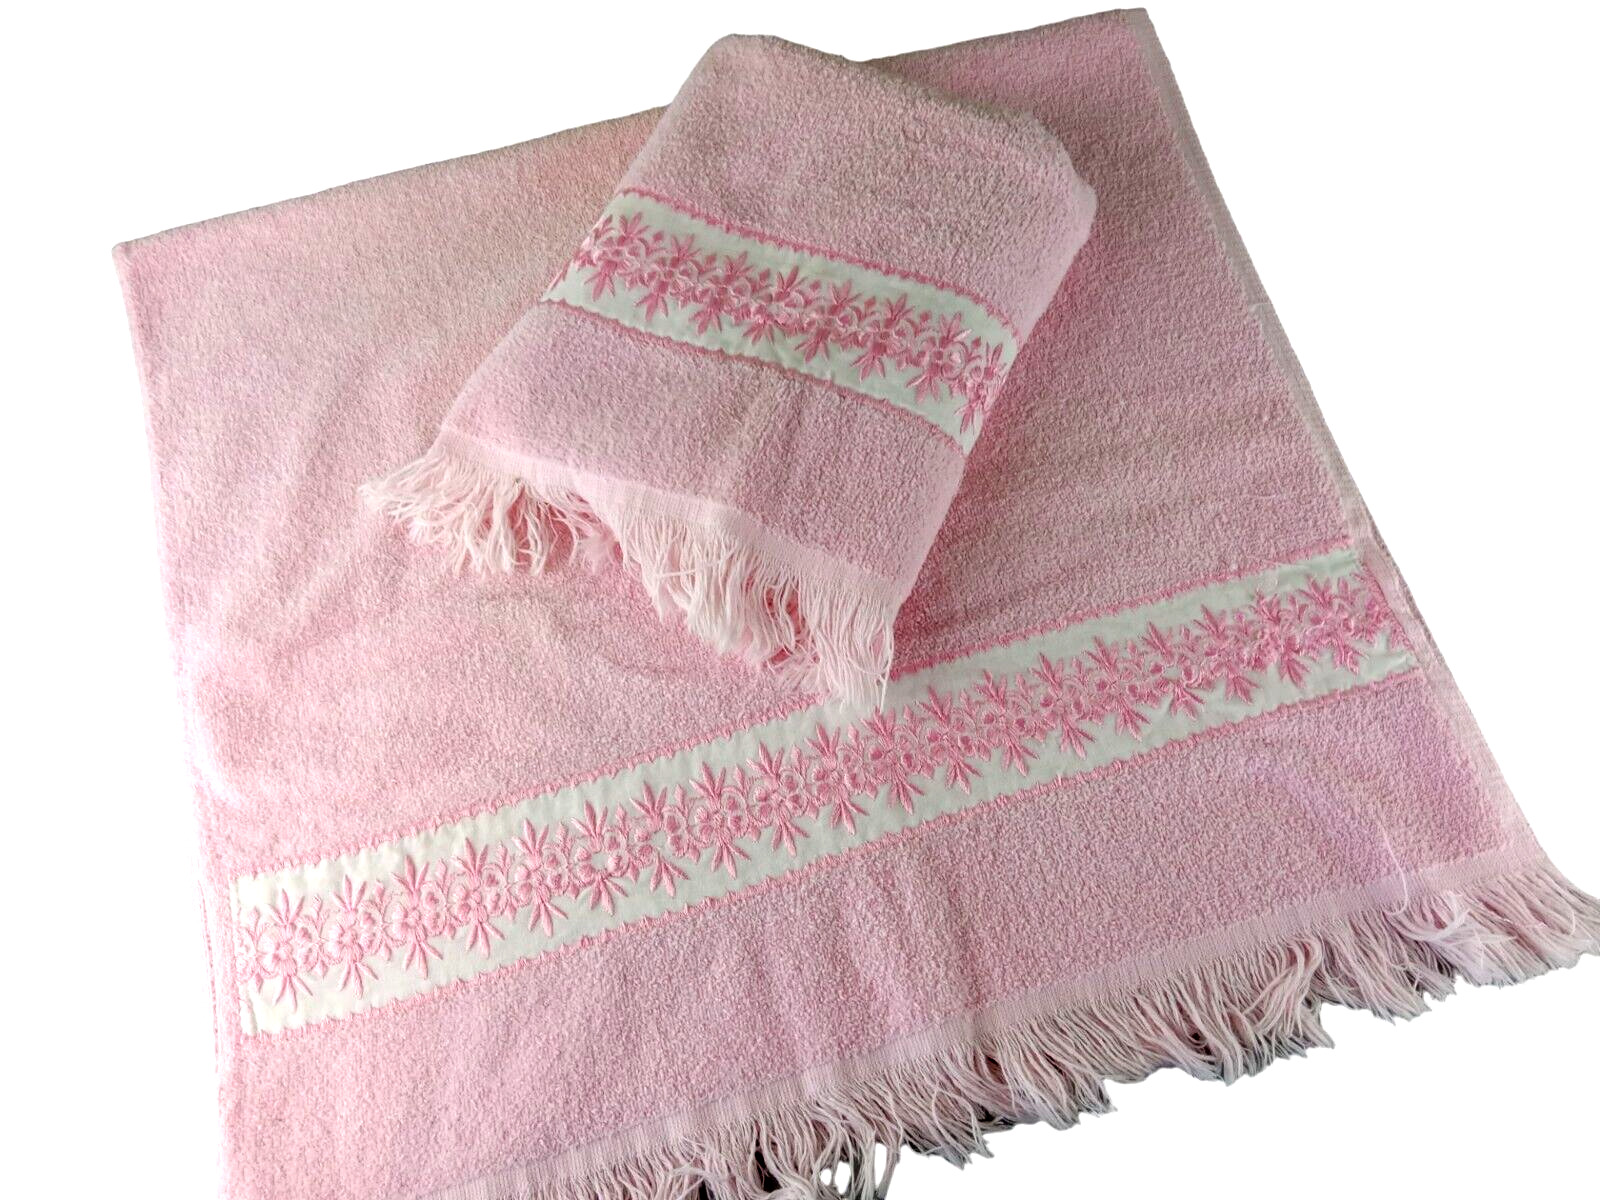 Two Vintage CANNON ROYAL FAMILY Embroidered Pink Fringe Bath Towels